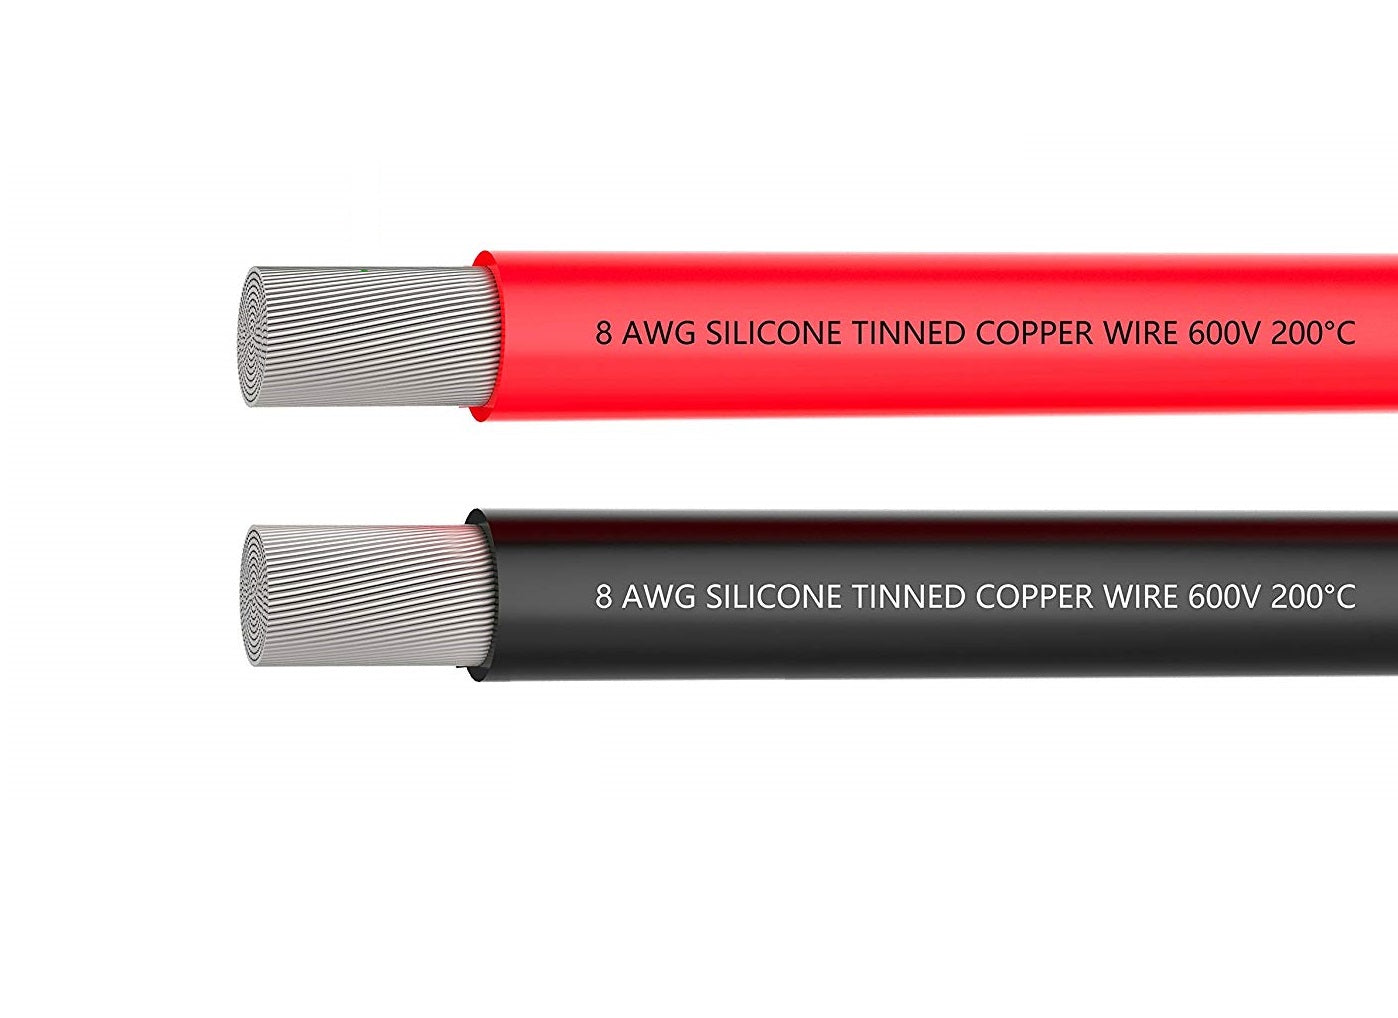 High Quality Ultra Flexible 8AWG Silicone Wire 0.5m (Red)